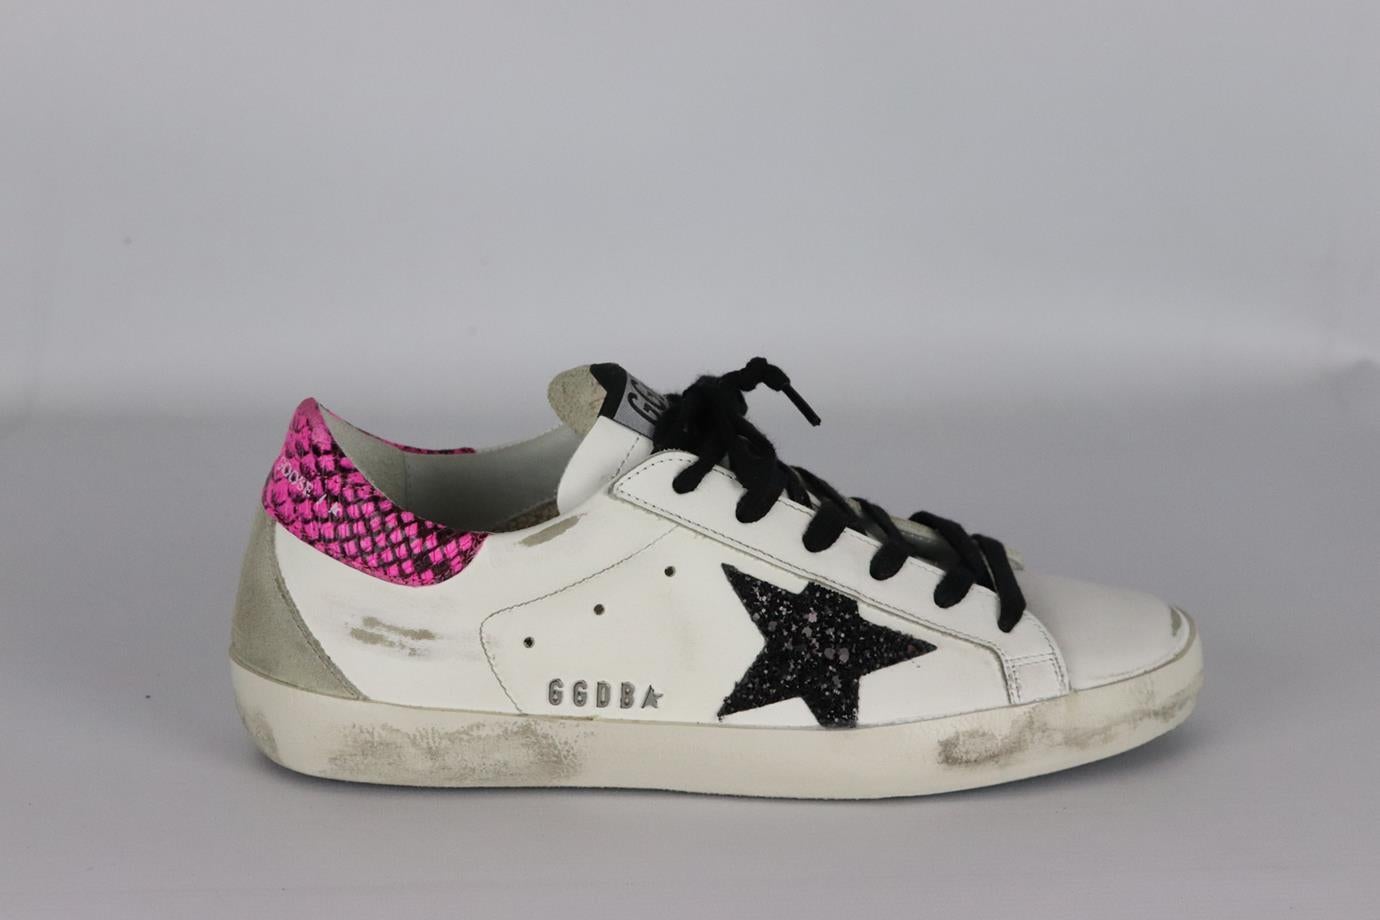 Golden Goose Deluxe Brand Superstar leather sneakers. White, black and pink. Lace up fastening at front. Does not come with dustbag or box. Size: EU 38 (UK 5, US 8). Insole: 10 in. Heel: 1 in. New without box
